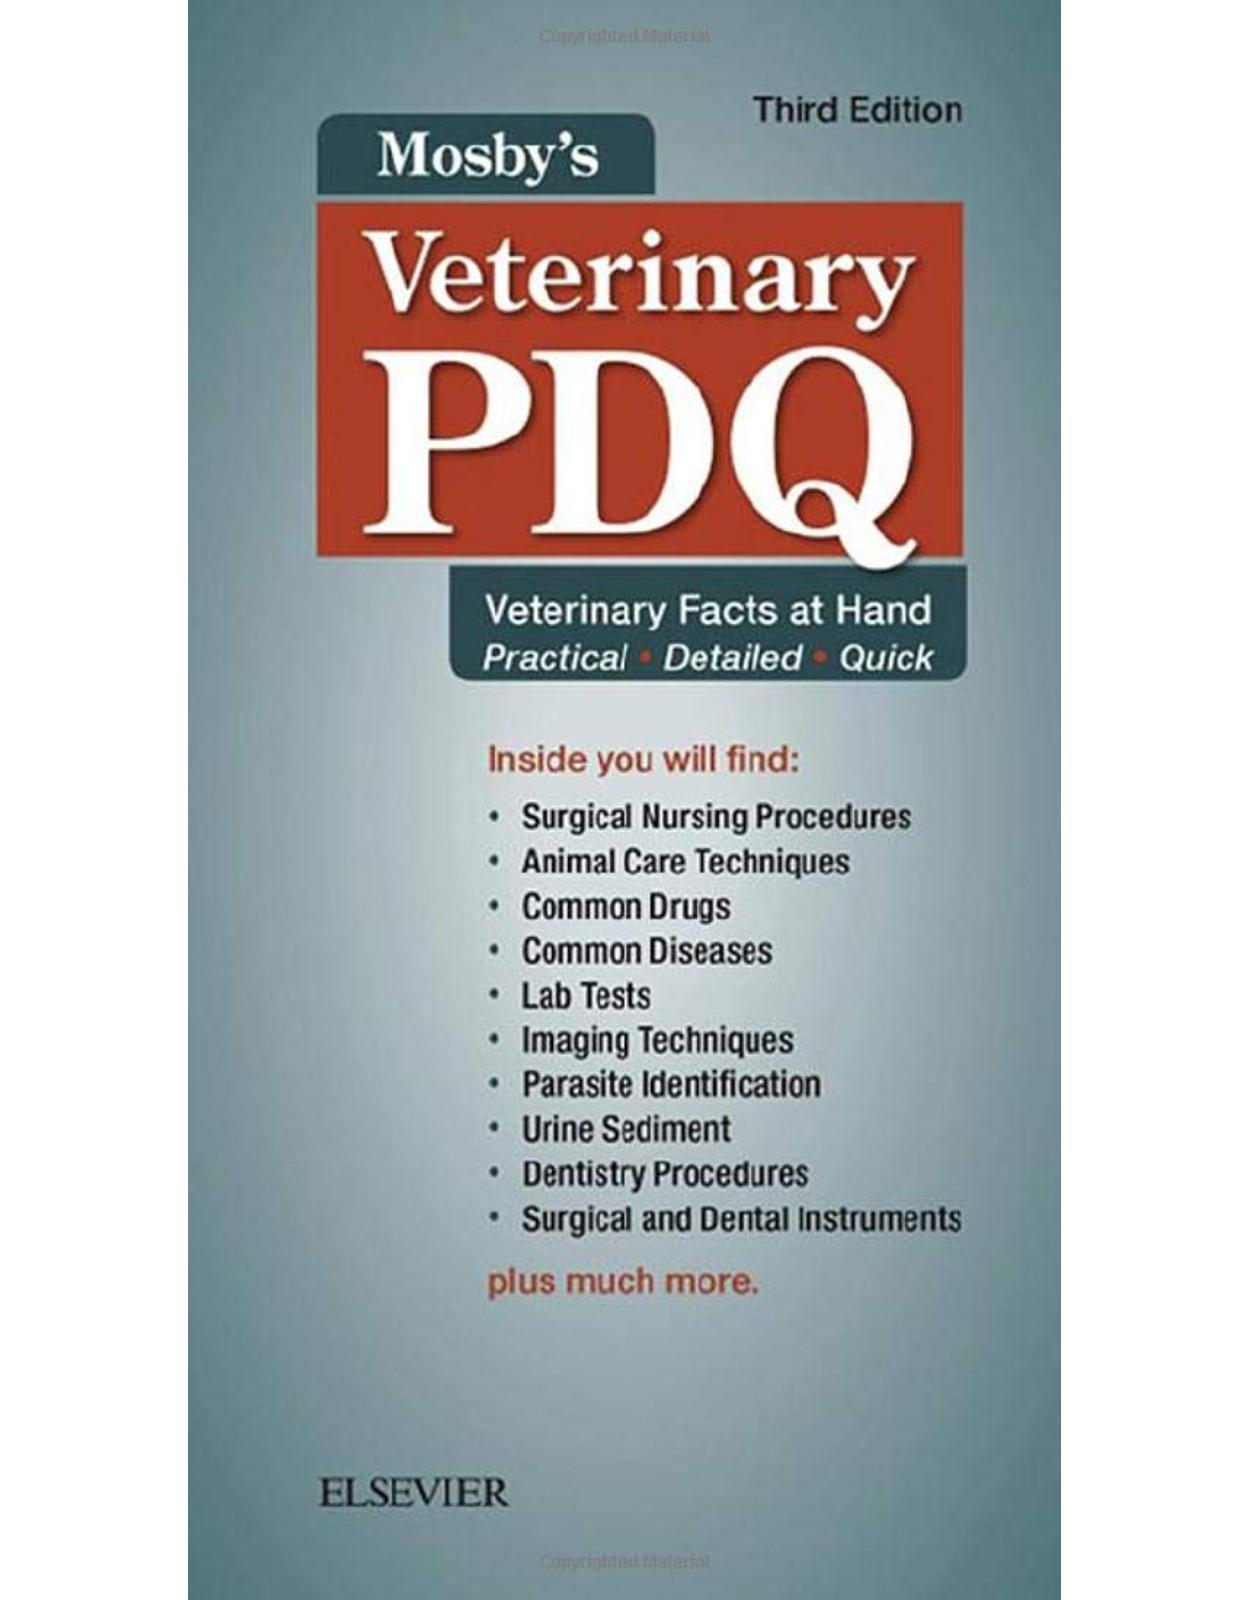 Mosby’s Veterinary PDQ: Veterinary Facts at Hand, 3e